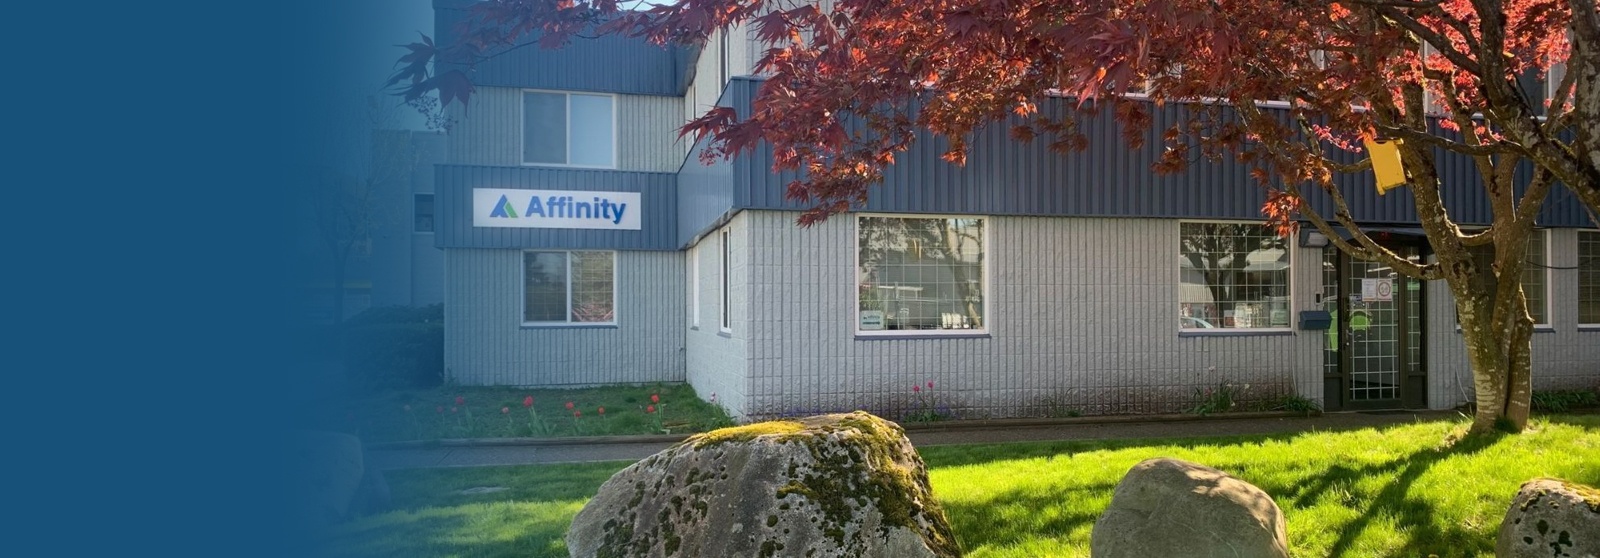 Blog by Affinity Manufacturing Ltd.